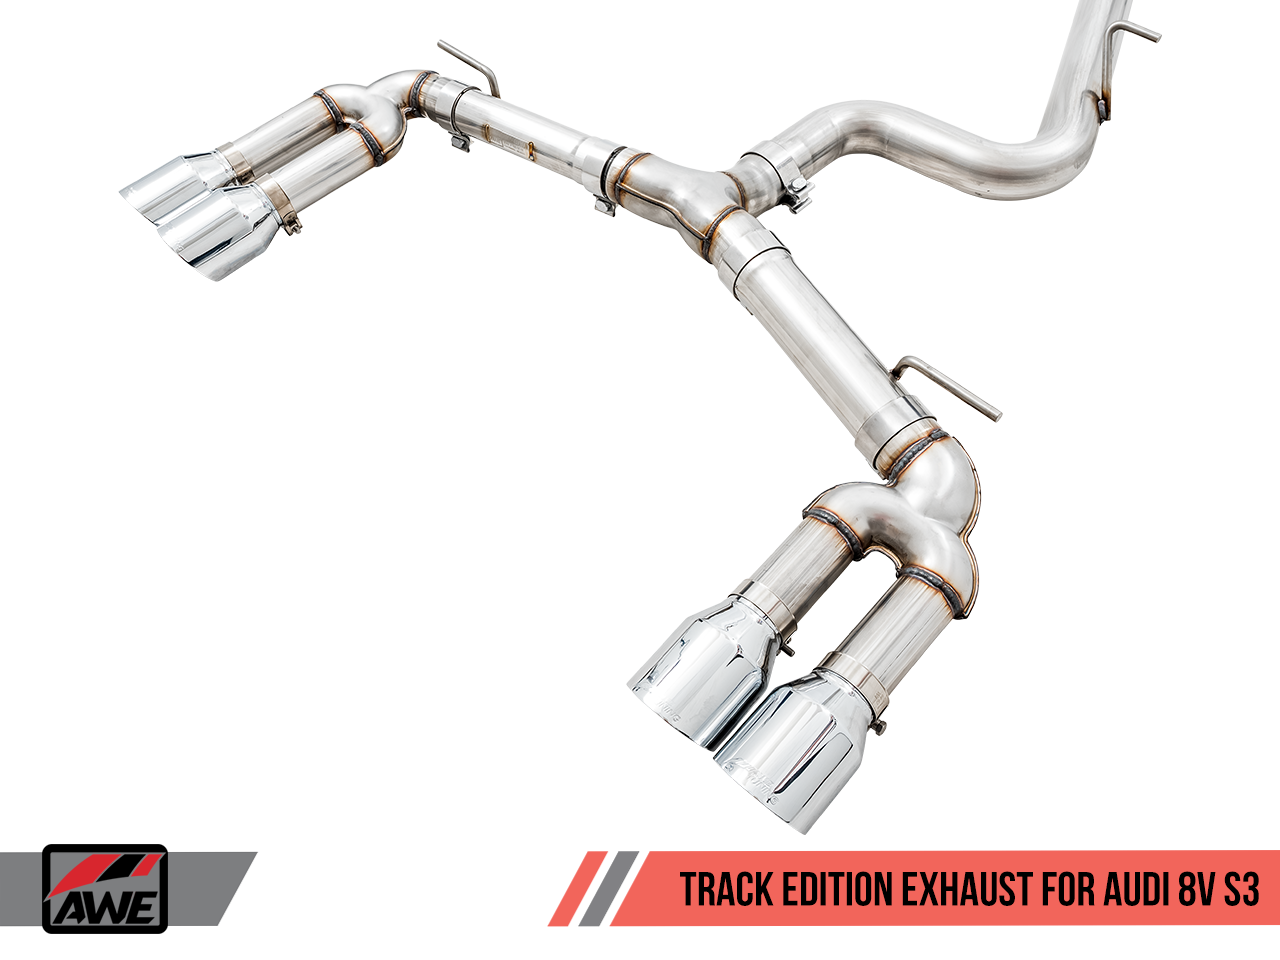 AWE Track Edition Exhaust for Audi 8V S3 - Chrome Silver Tips, 102mm - 0